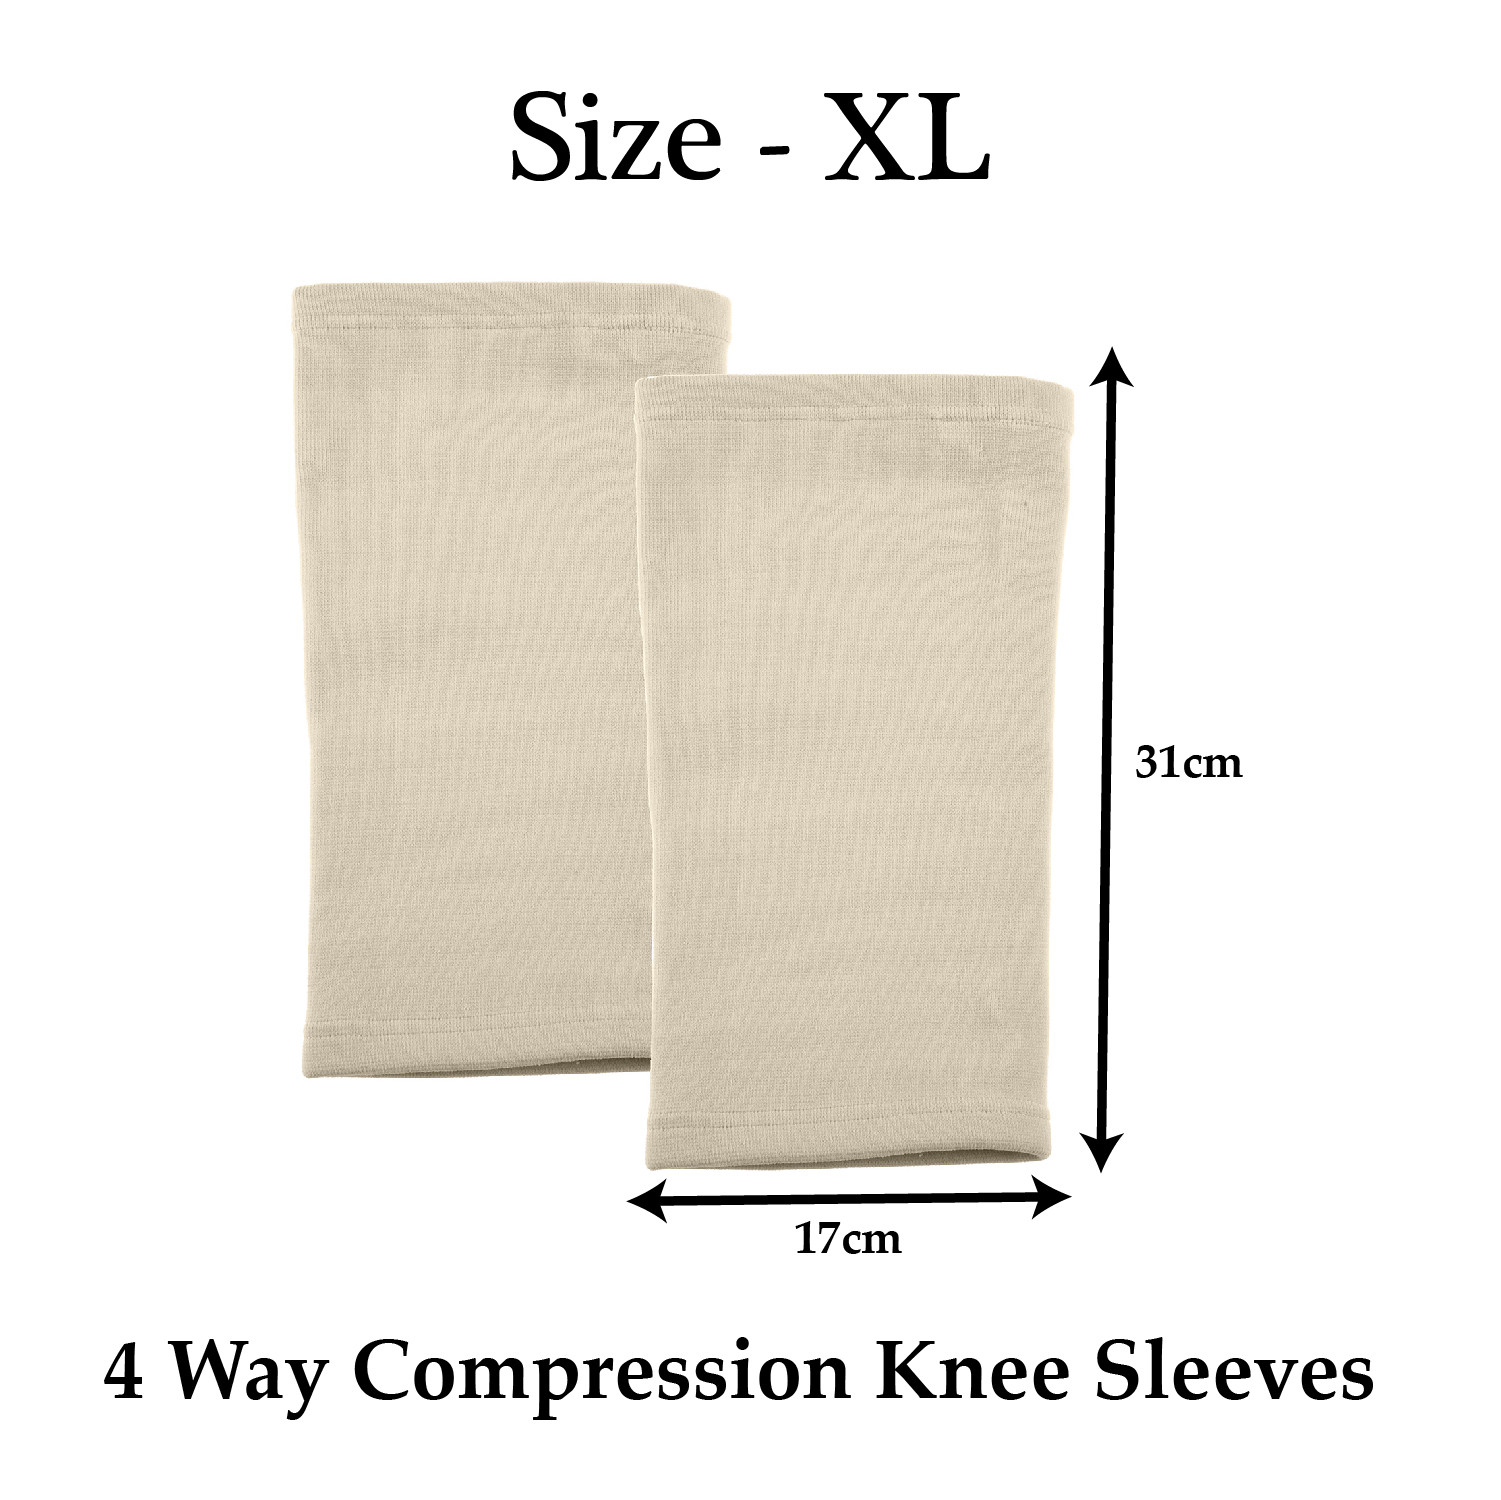 Kuber Industries Knee Cap | Cotton 4 Way Compression Knee Sleeves |Sleeves For Joint Pain | Sleeves For Arthritis Relief | Unisex Knee Wraps | Knee Bands |Size-XL|1 Pair|Cream